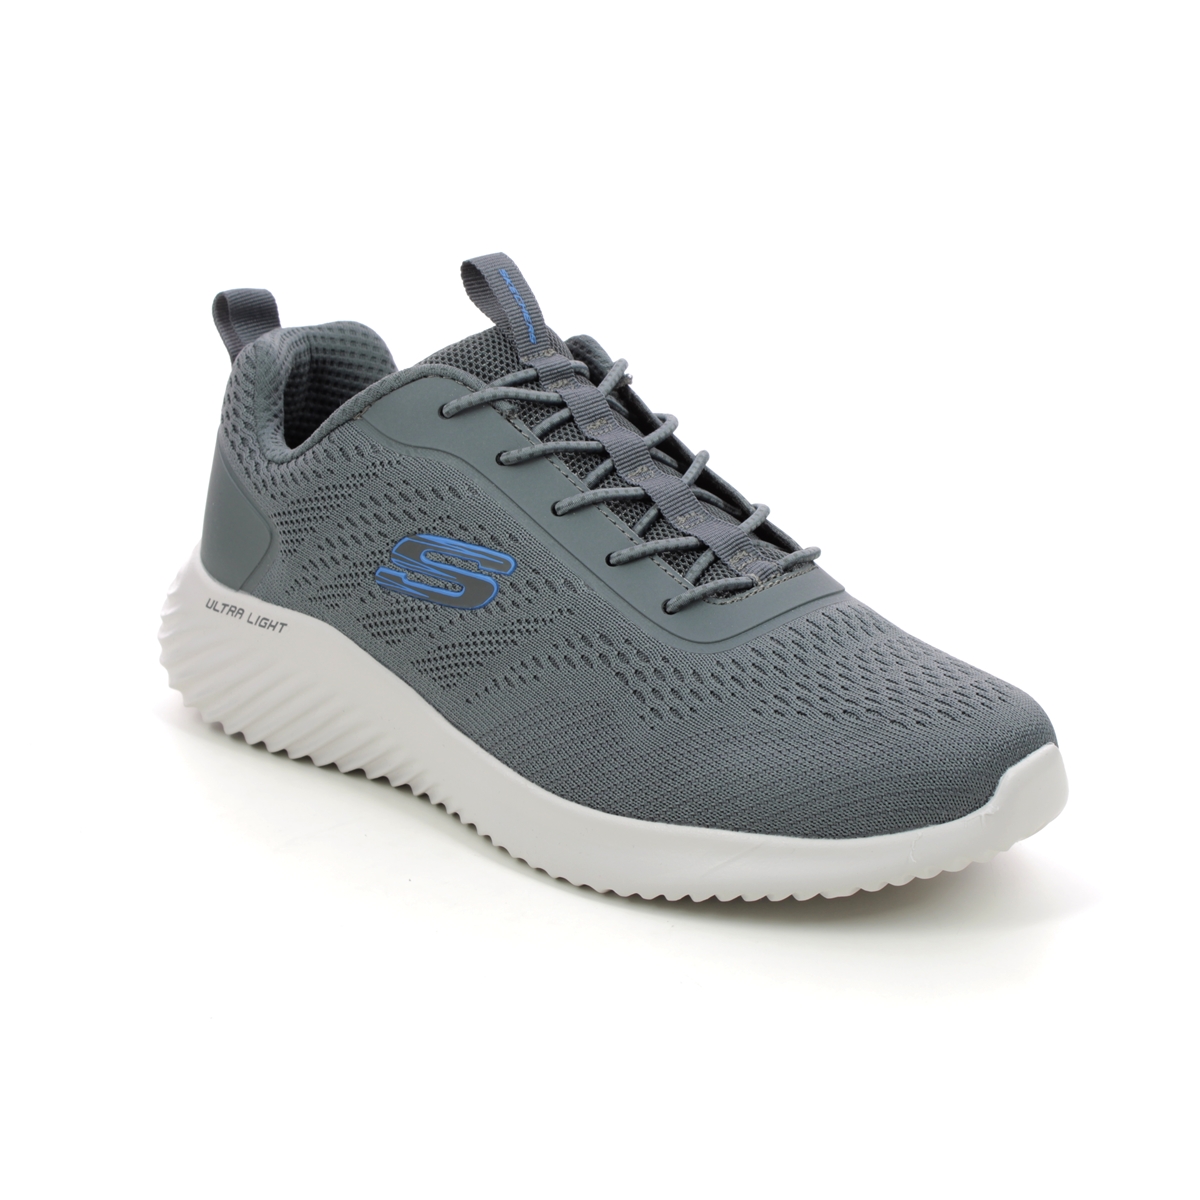 Skechers Bounder CHAR Charcoal Mens trainers 232377 in a Plain Textile in Size 9